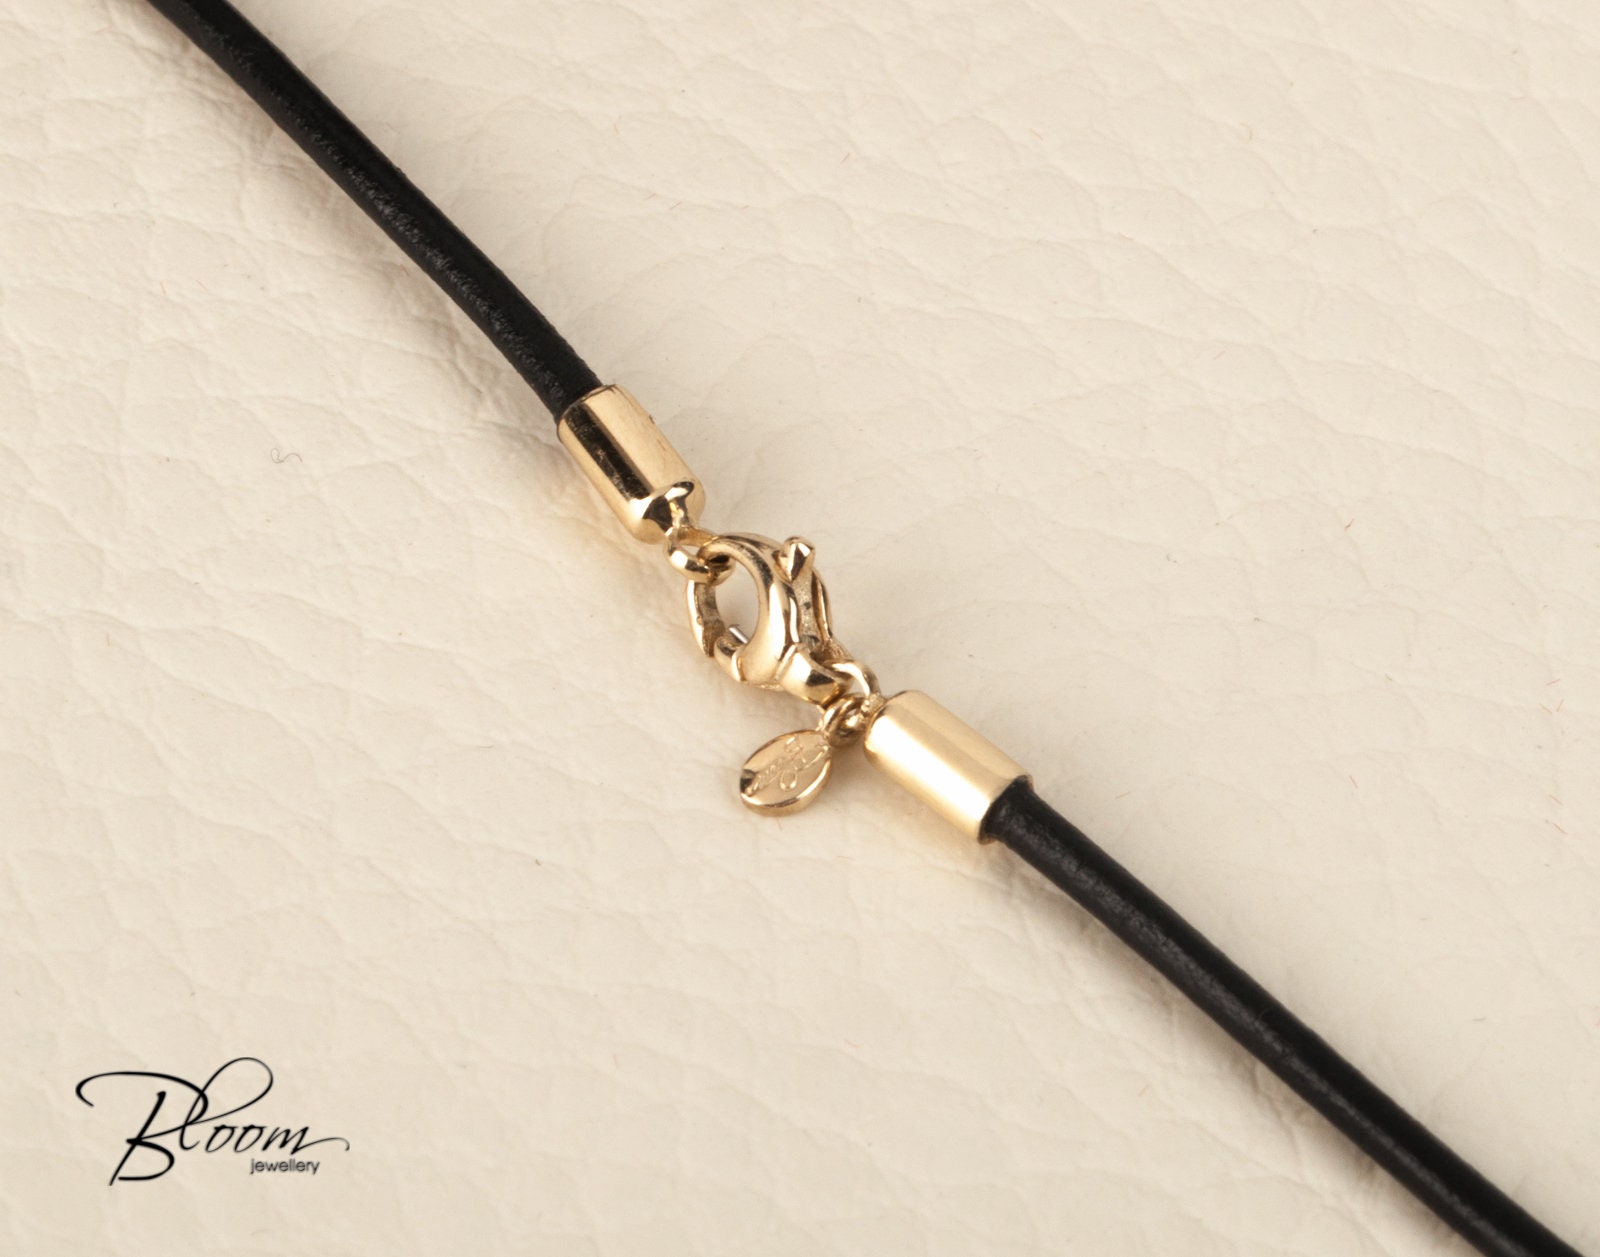 Braided Leather Cord Necklace 14K Solid Gold Clasp Leather Necklace for Men 14K Gold Clasp Genuine Leather Cord Necklace BloomDiamonds